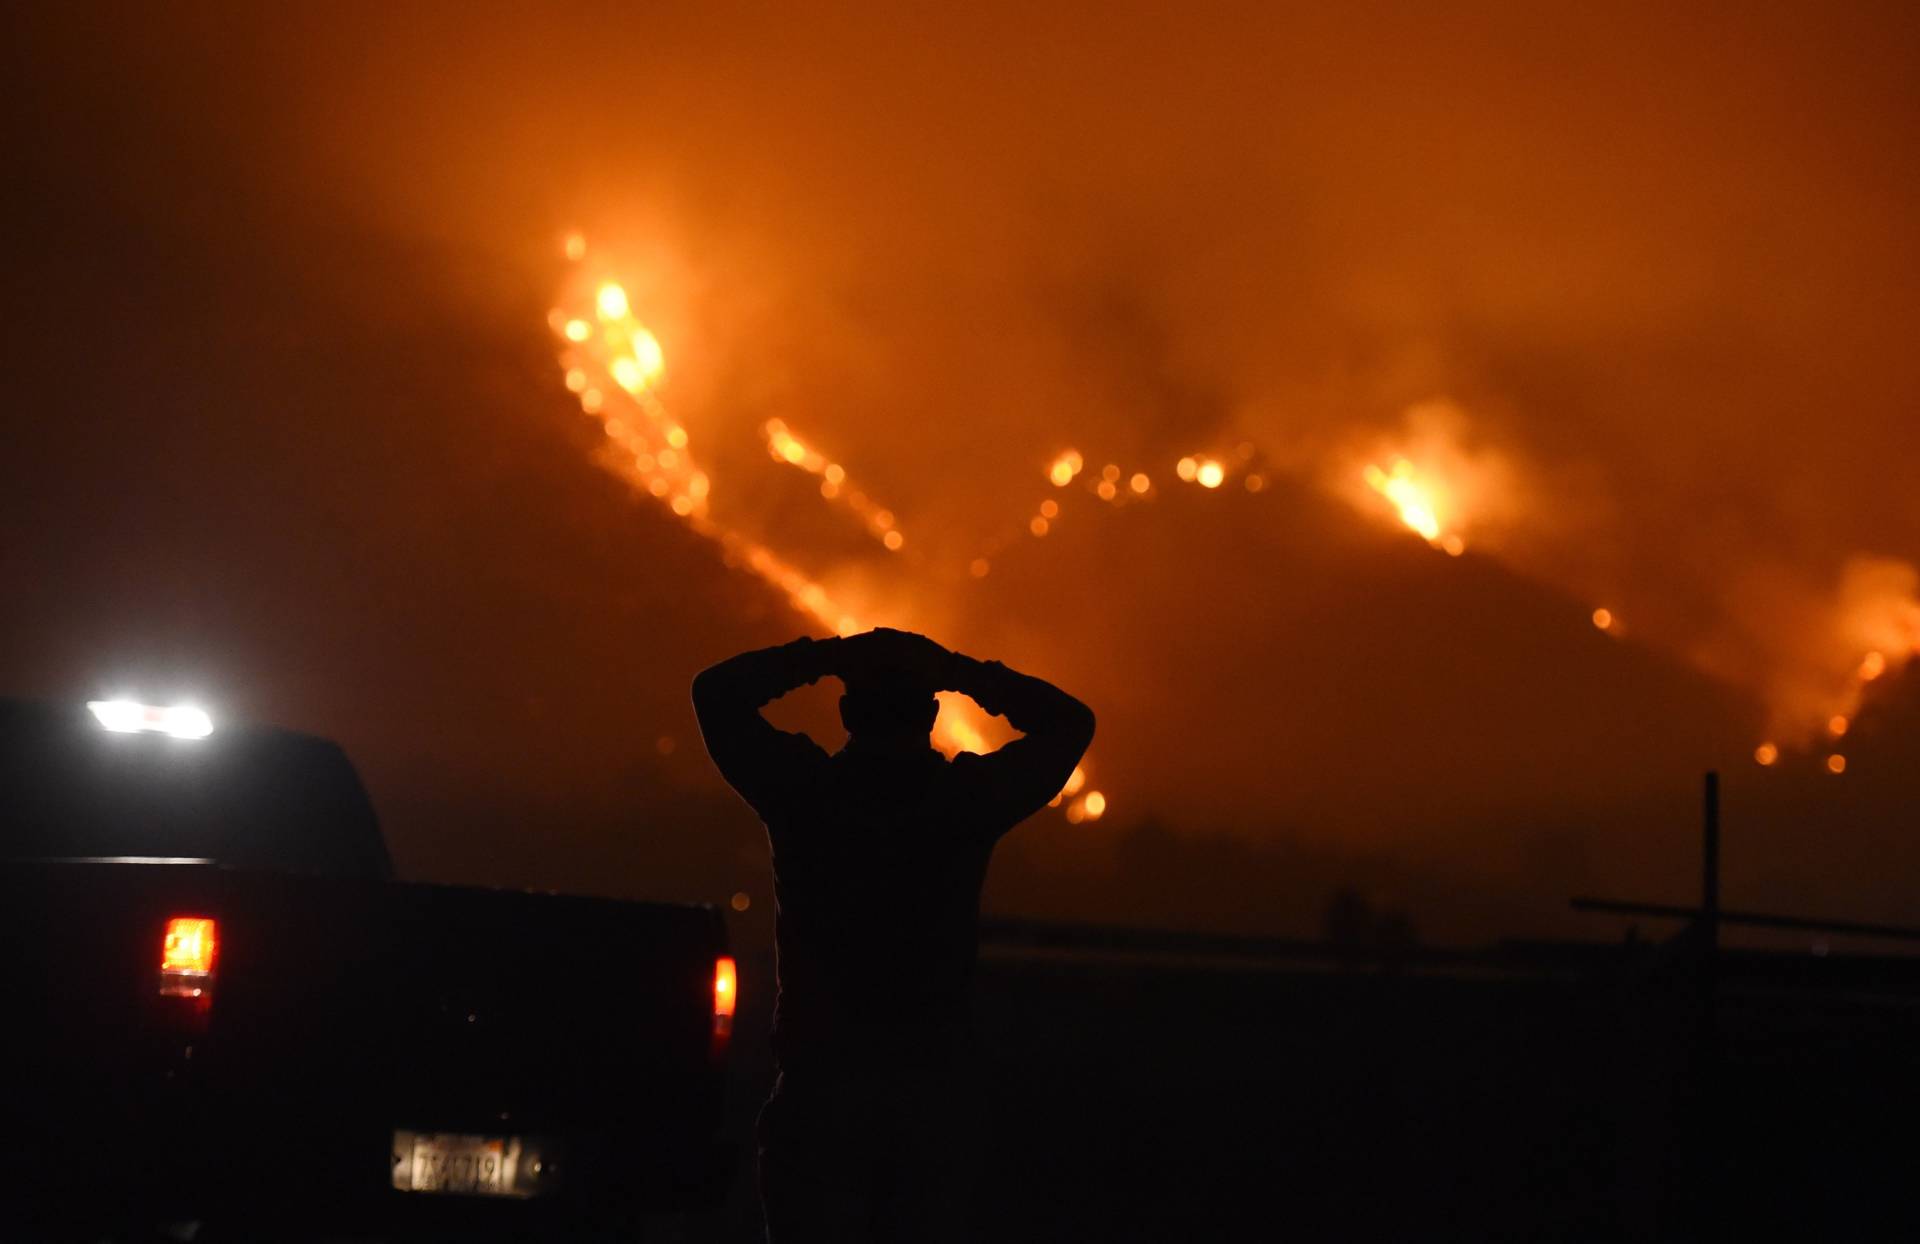 A man watches the Thomas Fire in the hills above Carpinteria on Dec. 11, 2017. The fire, burning in California's Ventura and Santa Barbara counties, has consumed more than 230,000 acres over the past week, making it the fifth-largest fire in state history. Robyn Beck/AFP/Getty Images